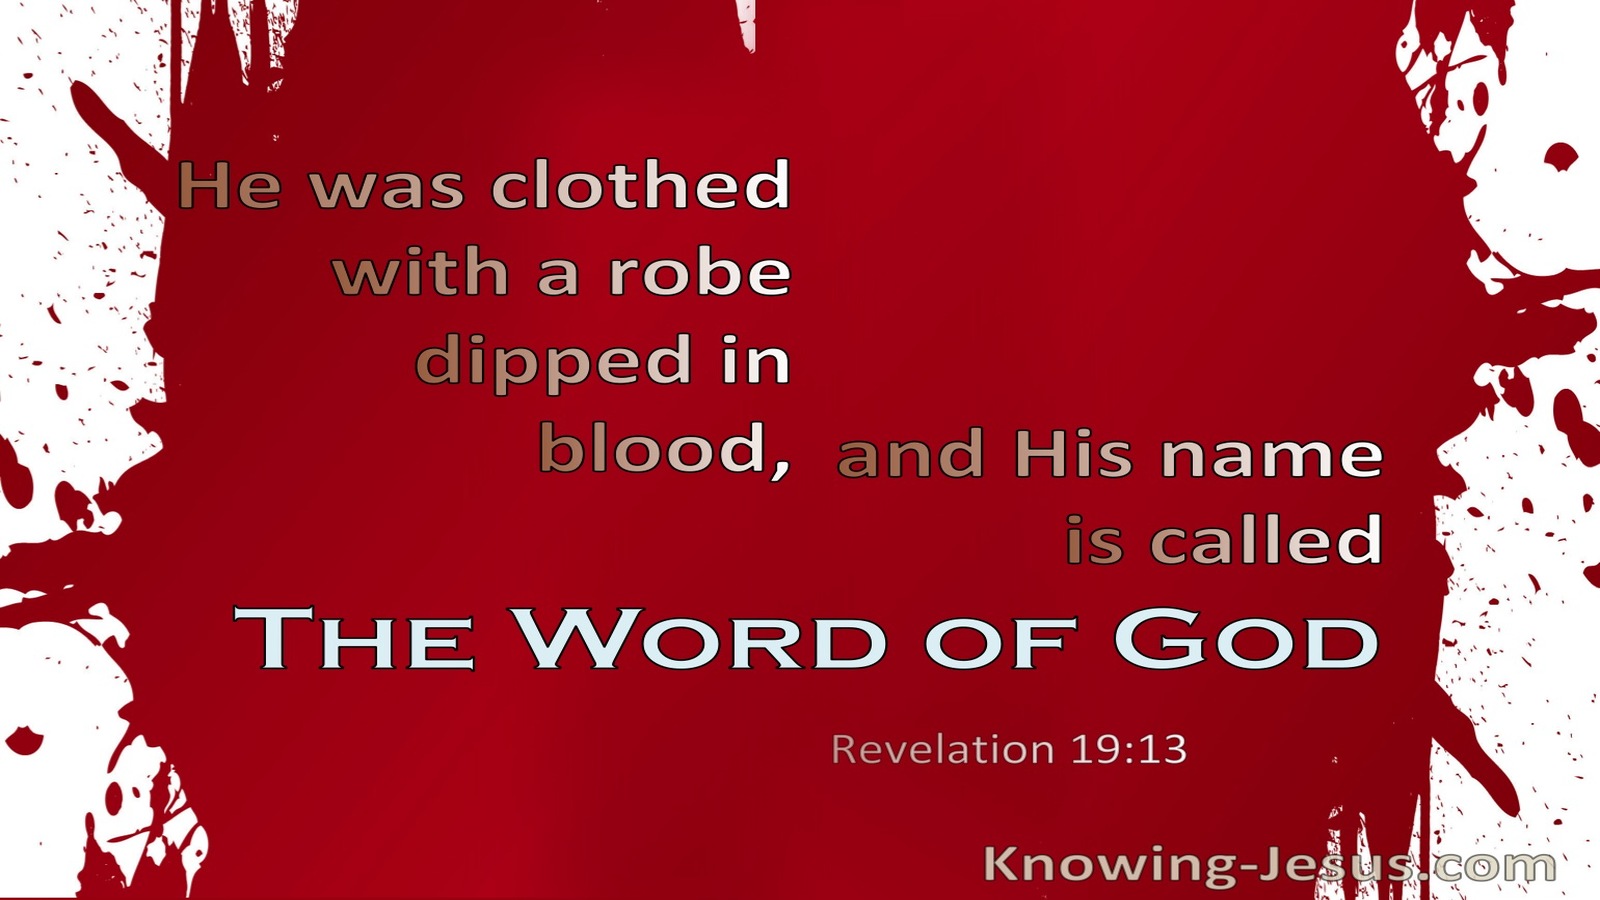 Revelation 19:13 His Name Is The Word Of God (red)